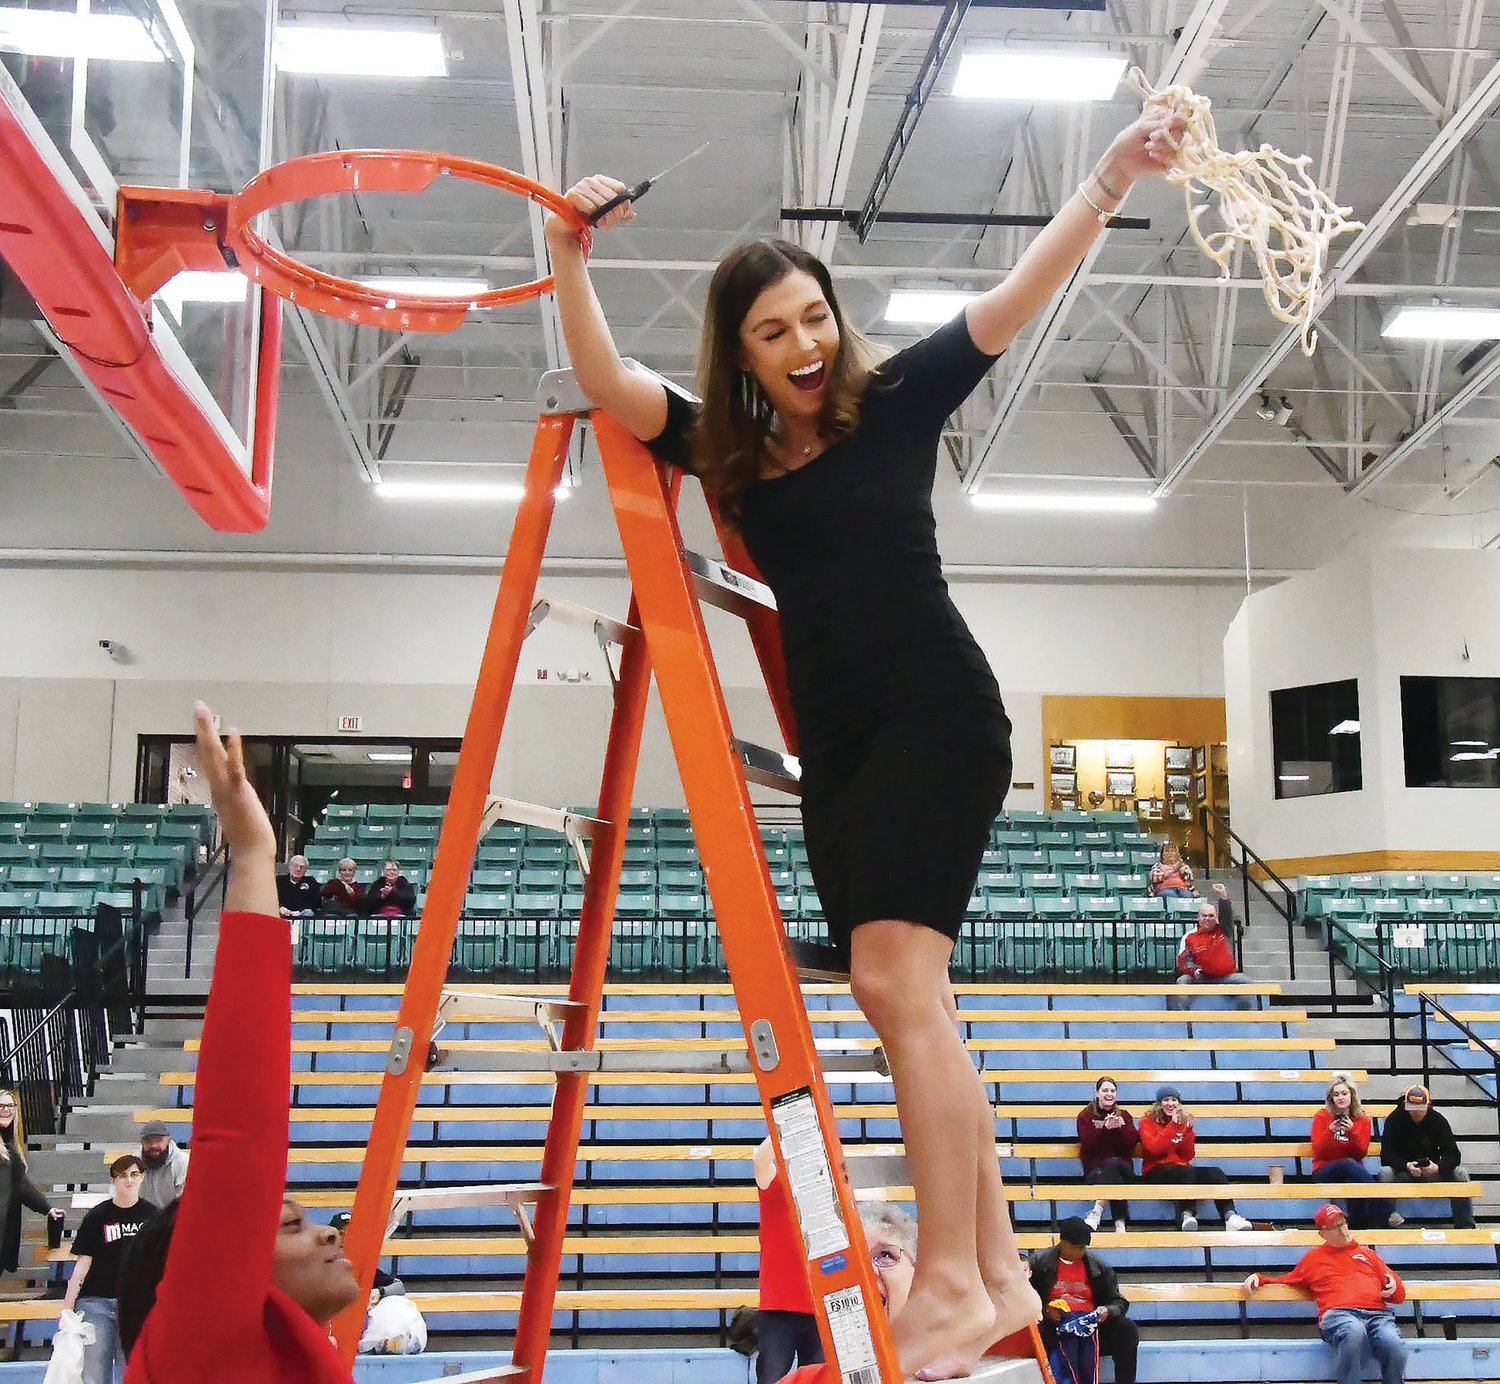 Moberly Area Community College head women's basketball coach Hana Haden swings the net in celebration after the Greyhounds defeated rival Mineral Area 78-57 for the Region XVI championship on Friday evening at Fitzsimmons-John Arena.